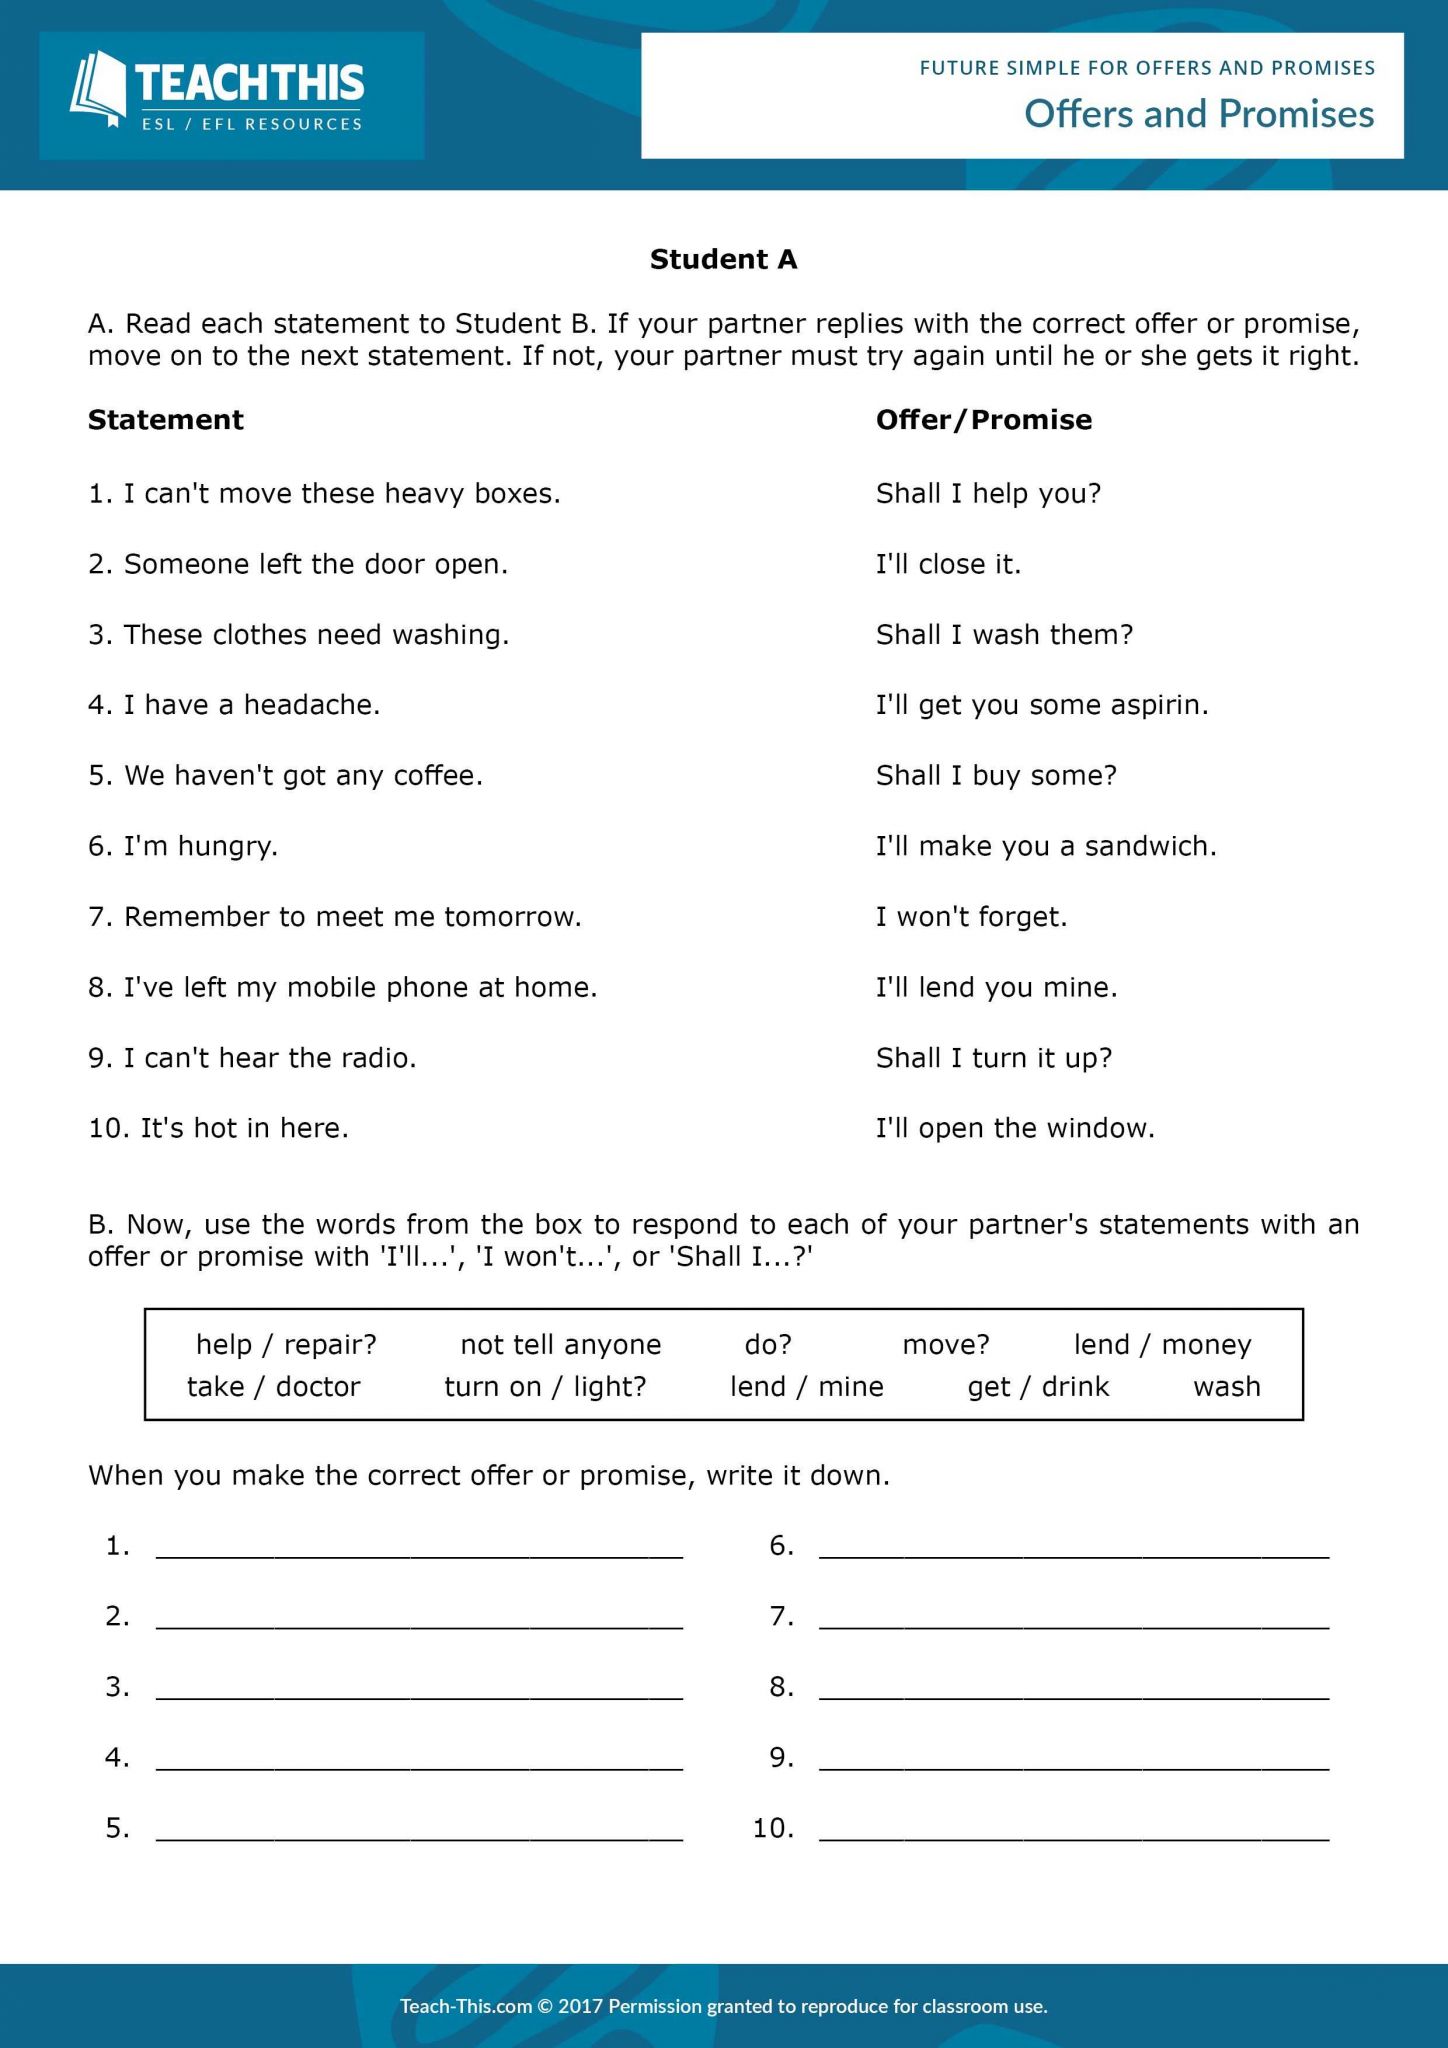 Therapy Worksheets for Teens Also Future Simple Fers Promises Decisions Pinterest